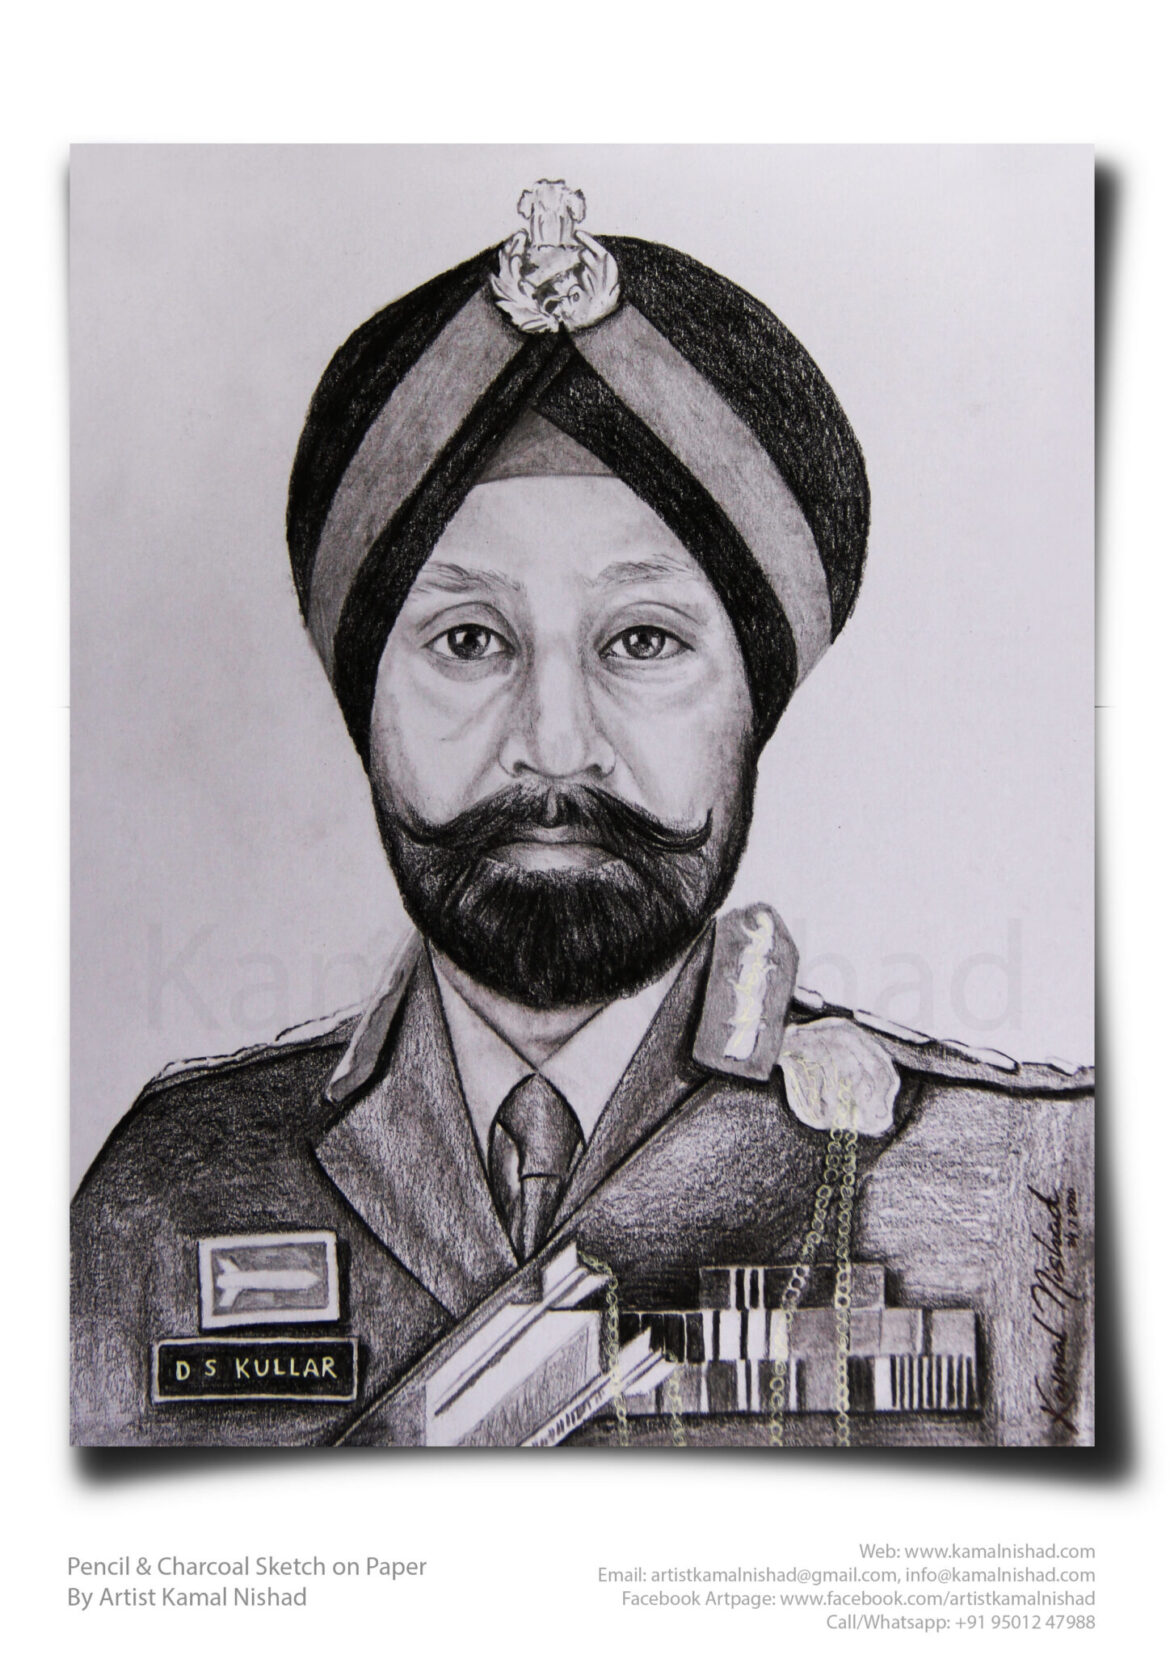 SOLDIER | Pencil & Charcoal Sketch Title : SOLDIER Medium : Pencil & Charcoal Sketch Size : A3 Paper size (Sketch size 18.5 x 23.7 cm*) Artist : Kamal Nishad This is a Handmade/hand-drawn Sketch made with Pencil & Charcoal “SOLDIER”. One of my client/customer wanted me to draw this portrait for his office. SIZE: Paper size A3 (work area 11.7 x 16.5 inches *estimated) Created by © Kamal Nishad. All rights reserved.